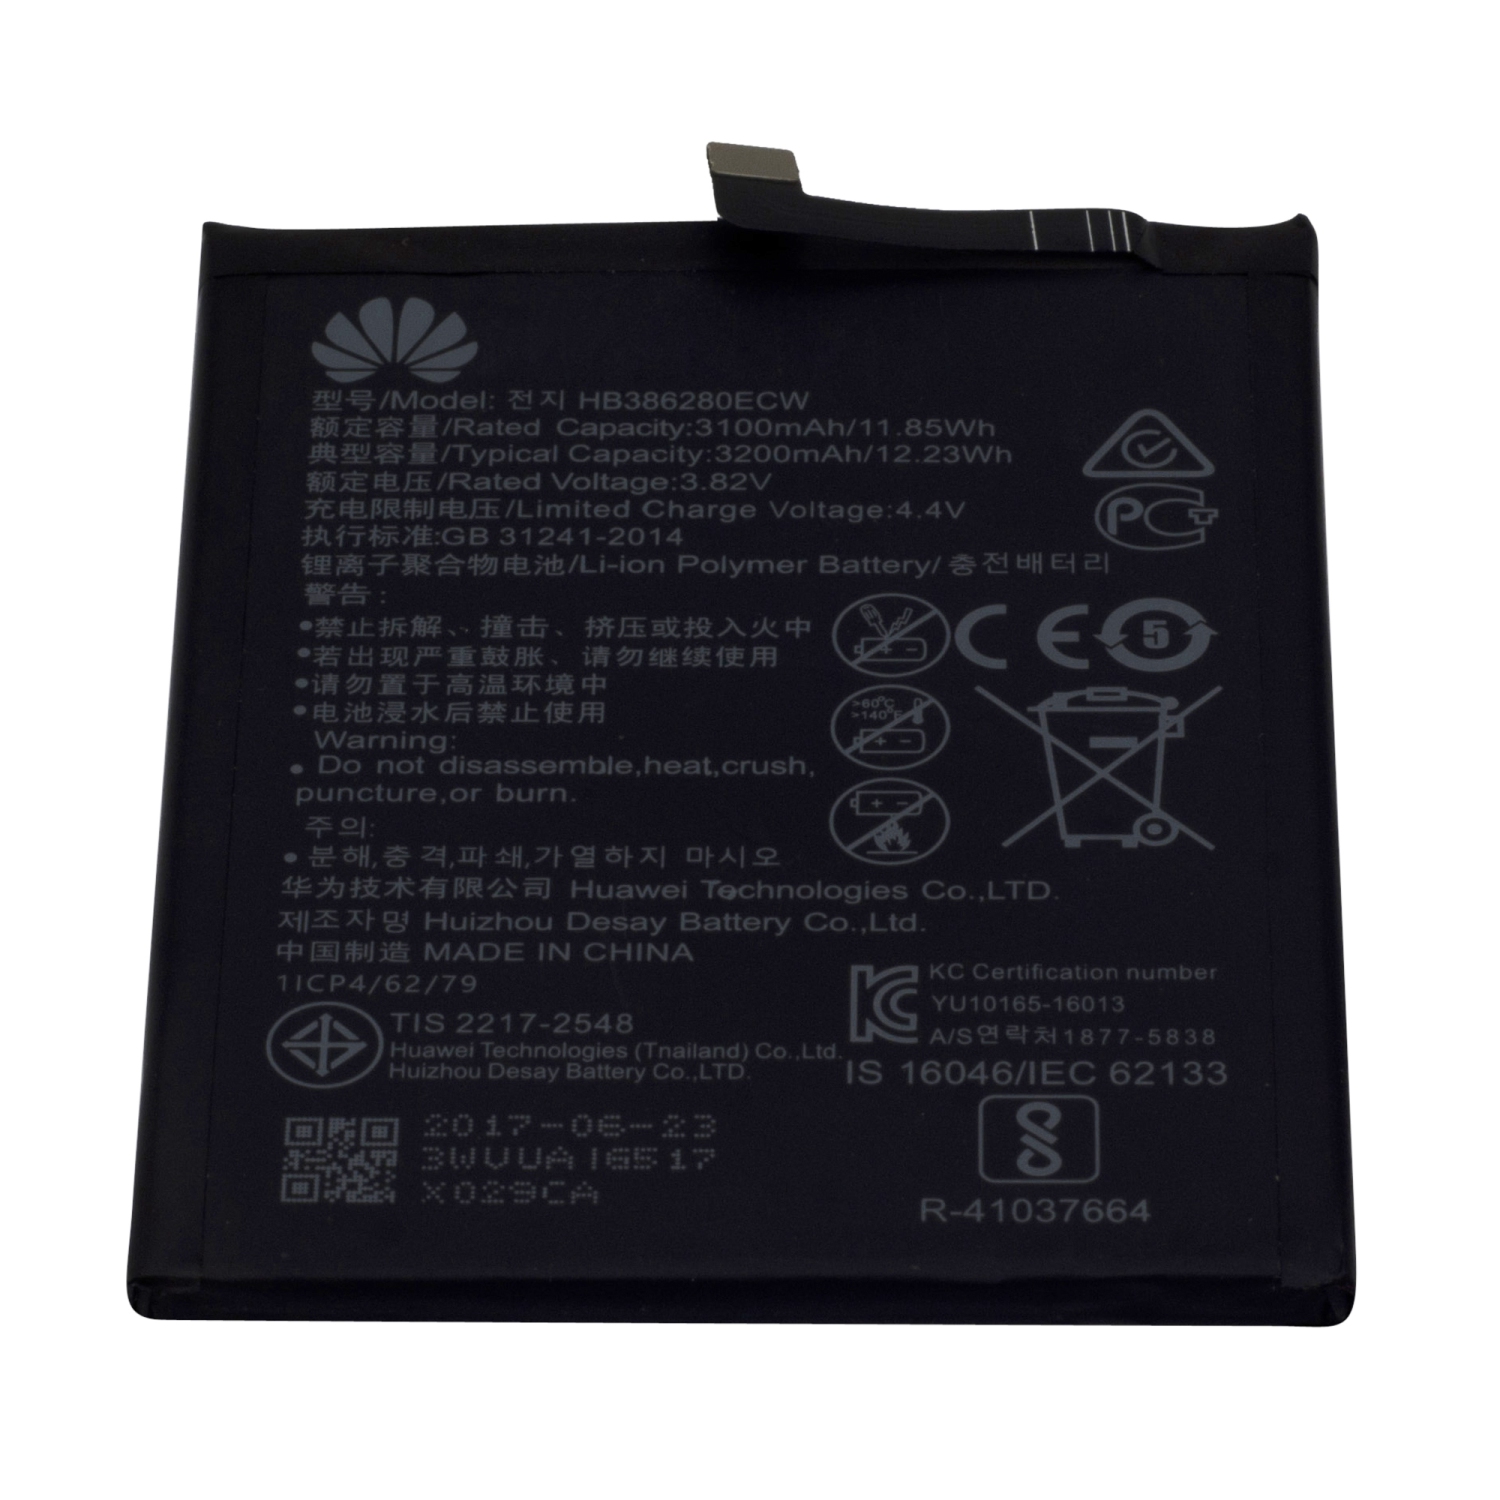 Replacement Lithium-ion Polymer Battery HB386280ECW For Huawei P10 / Honor 9